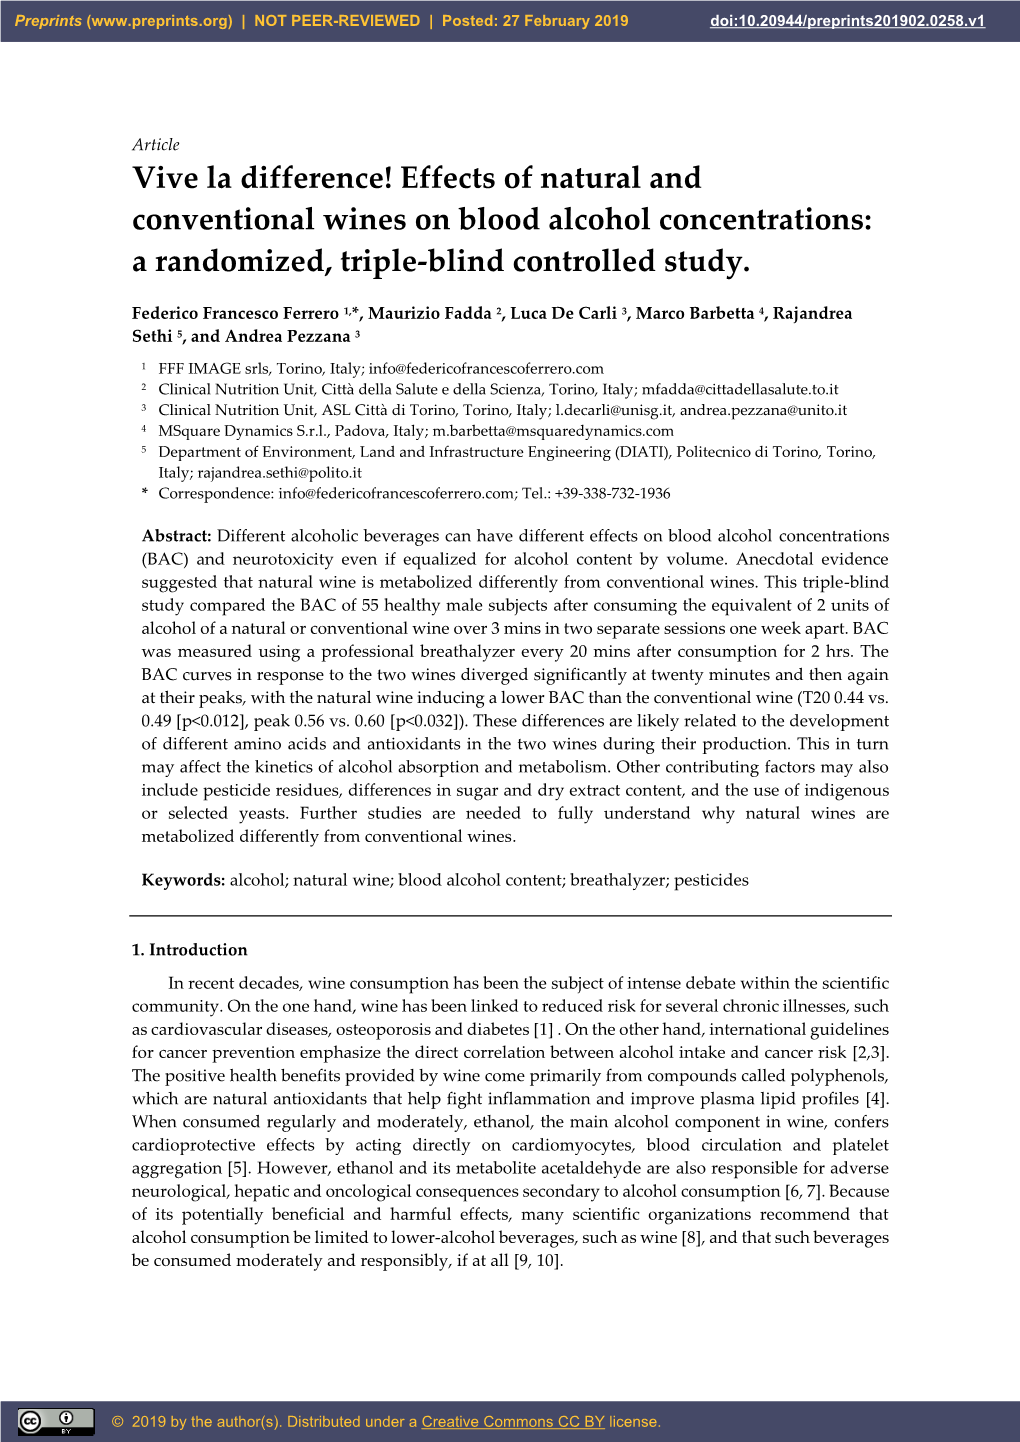 Effects of Natural and Conventional Wines on Blood Alcohol Concentrations: a Randomized, Triple-Blind Controlled Study